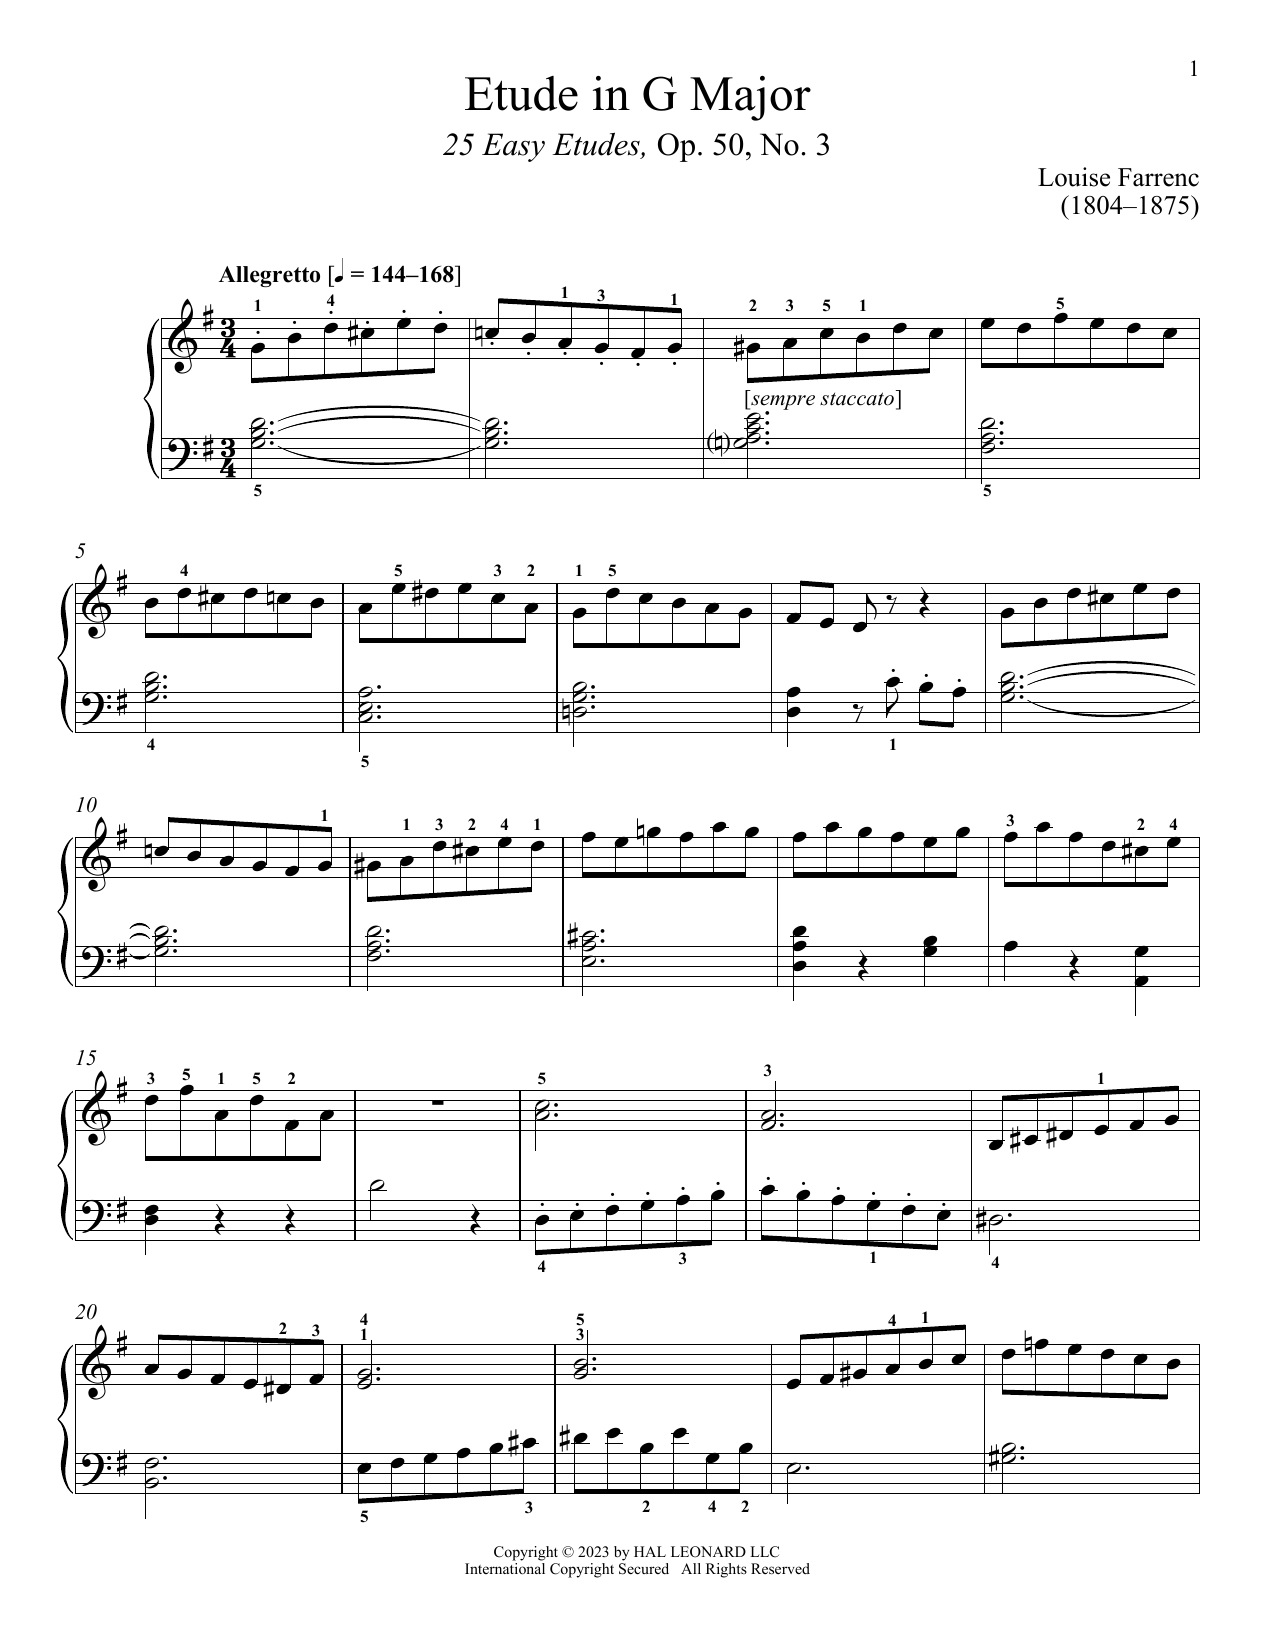 Download Louise Dumont Farrenc Etude in G Major Sheet Music